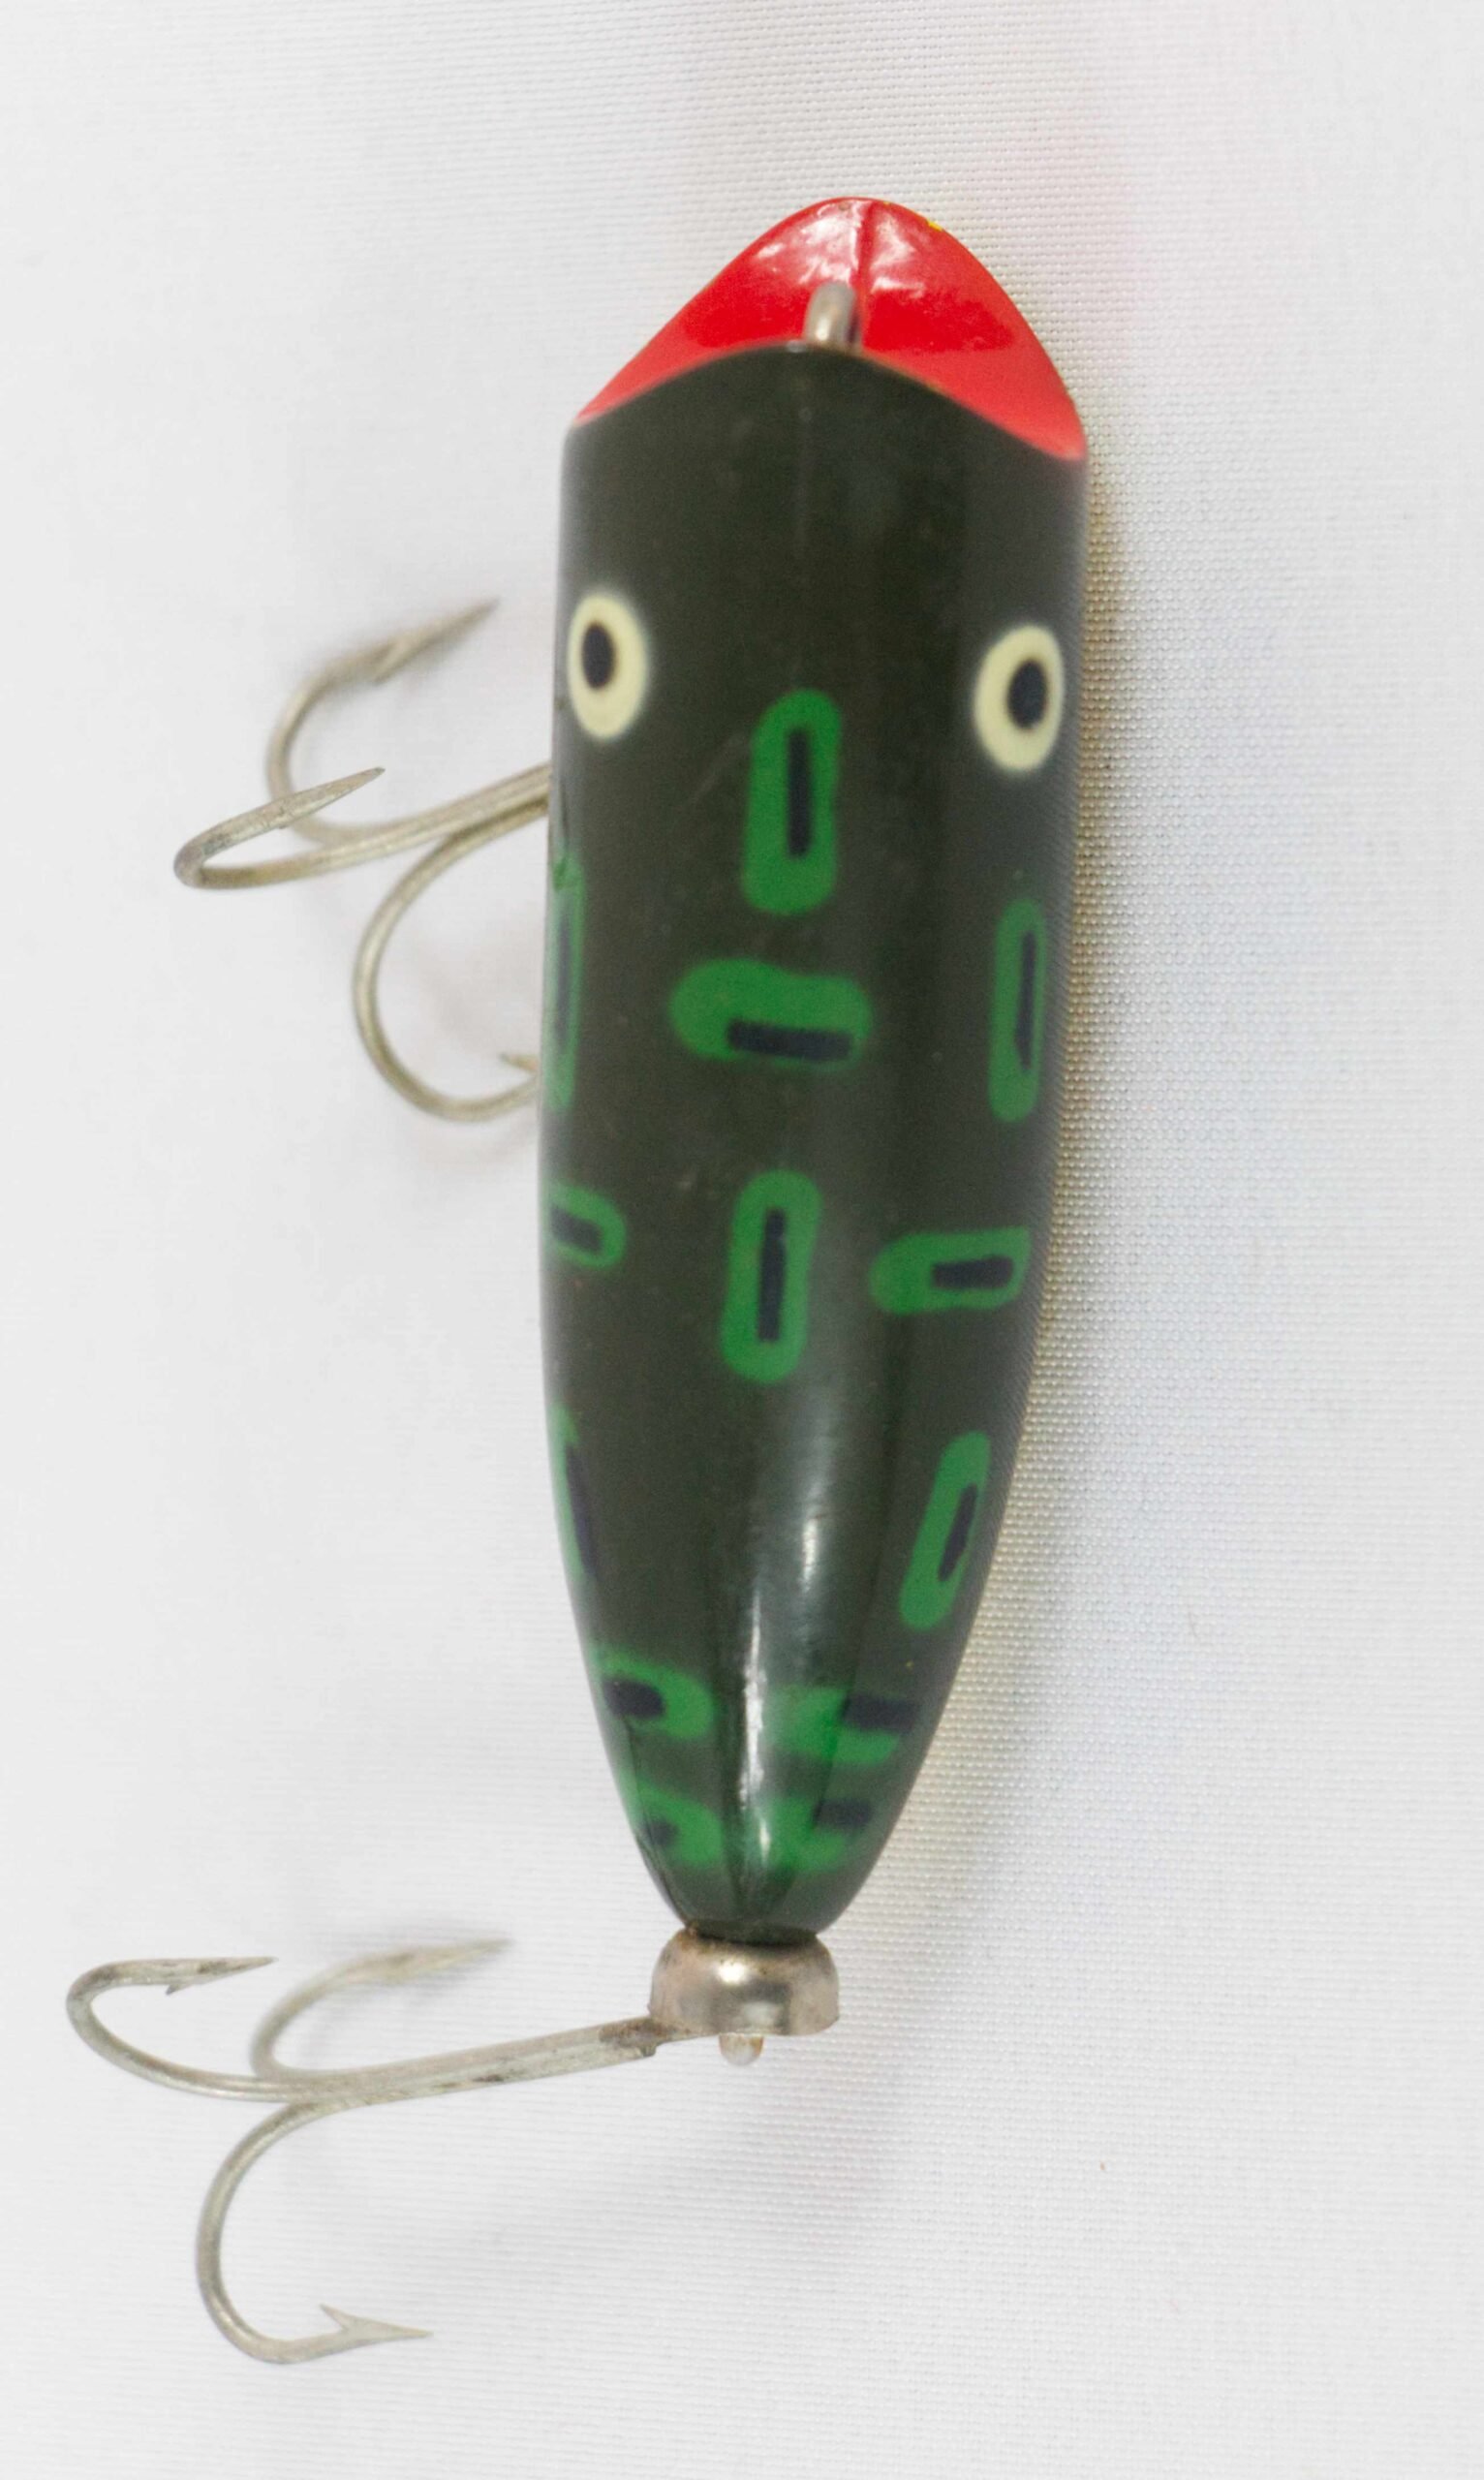 Heddon Tiny Runt Lucky 13 Antique / Vintage Fishing Lure, Tackle, Gear,  Fish Crankbait Minnow Plastic Topwater Bait, Angler Classic Fishhook 